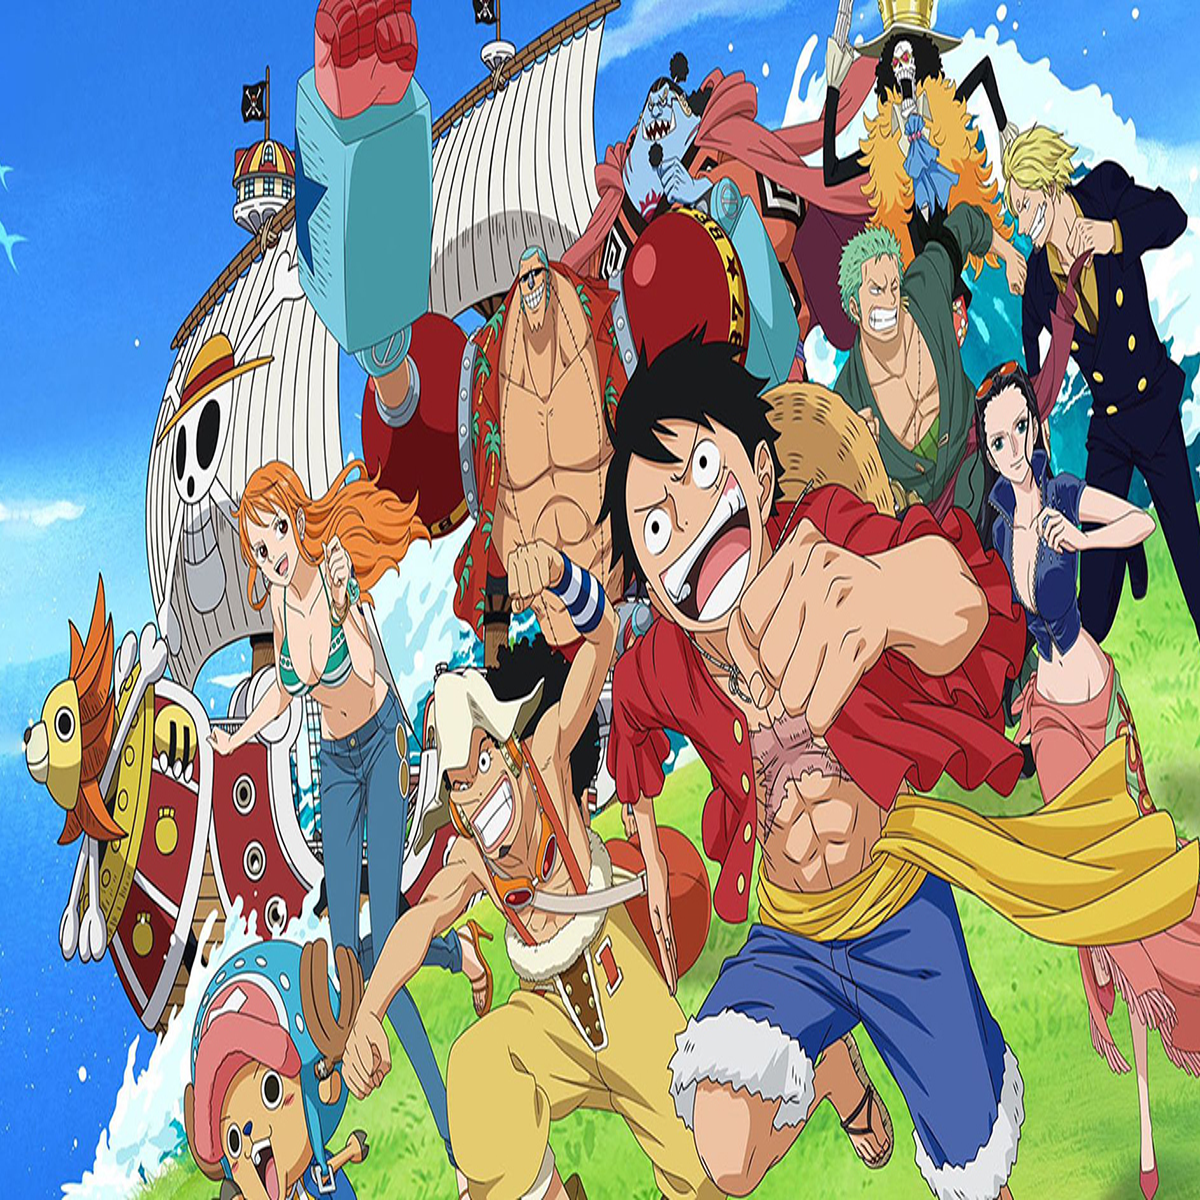 One Piece (live-action ONA) - Anime News Network